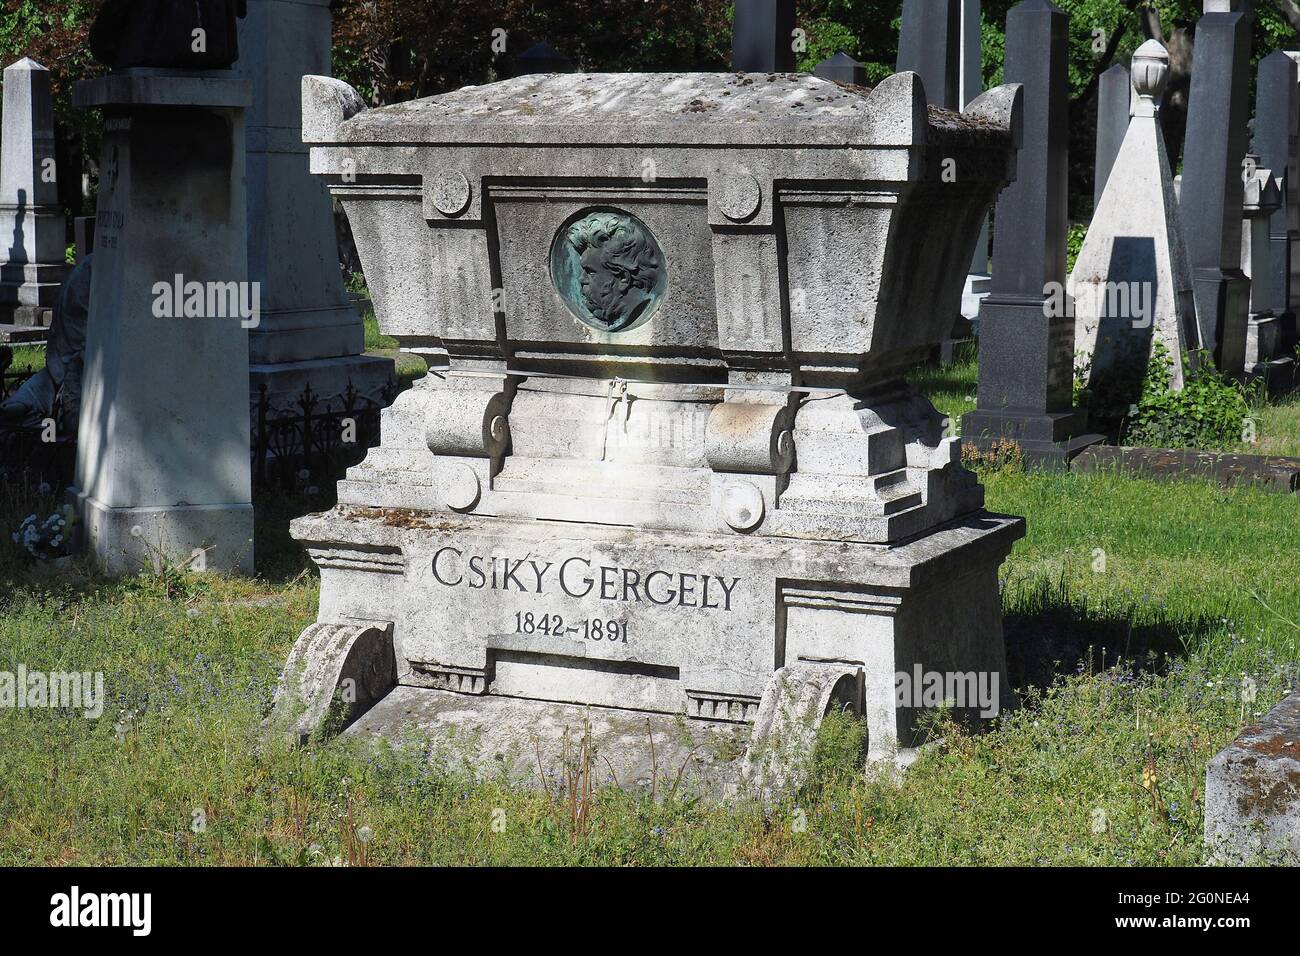 Tomb of Gergely Csiky dramatist (Gregor Csiky), Kerepesi Cemetery (Fiume Road National Graveyard), 8th District, Budapest, Hungary, Europe Stock Photo